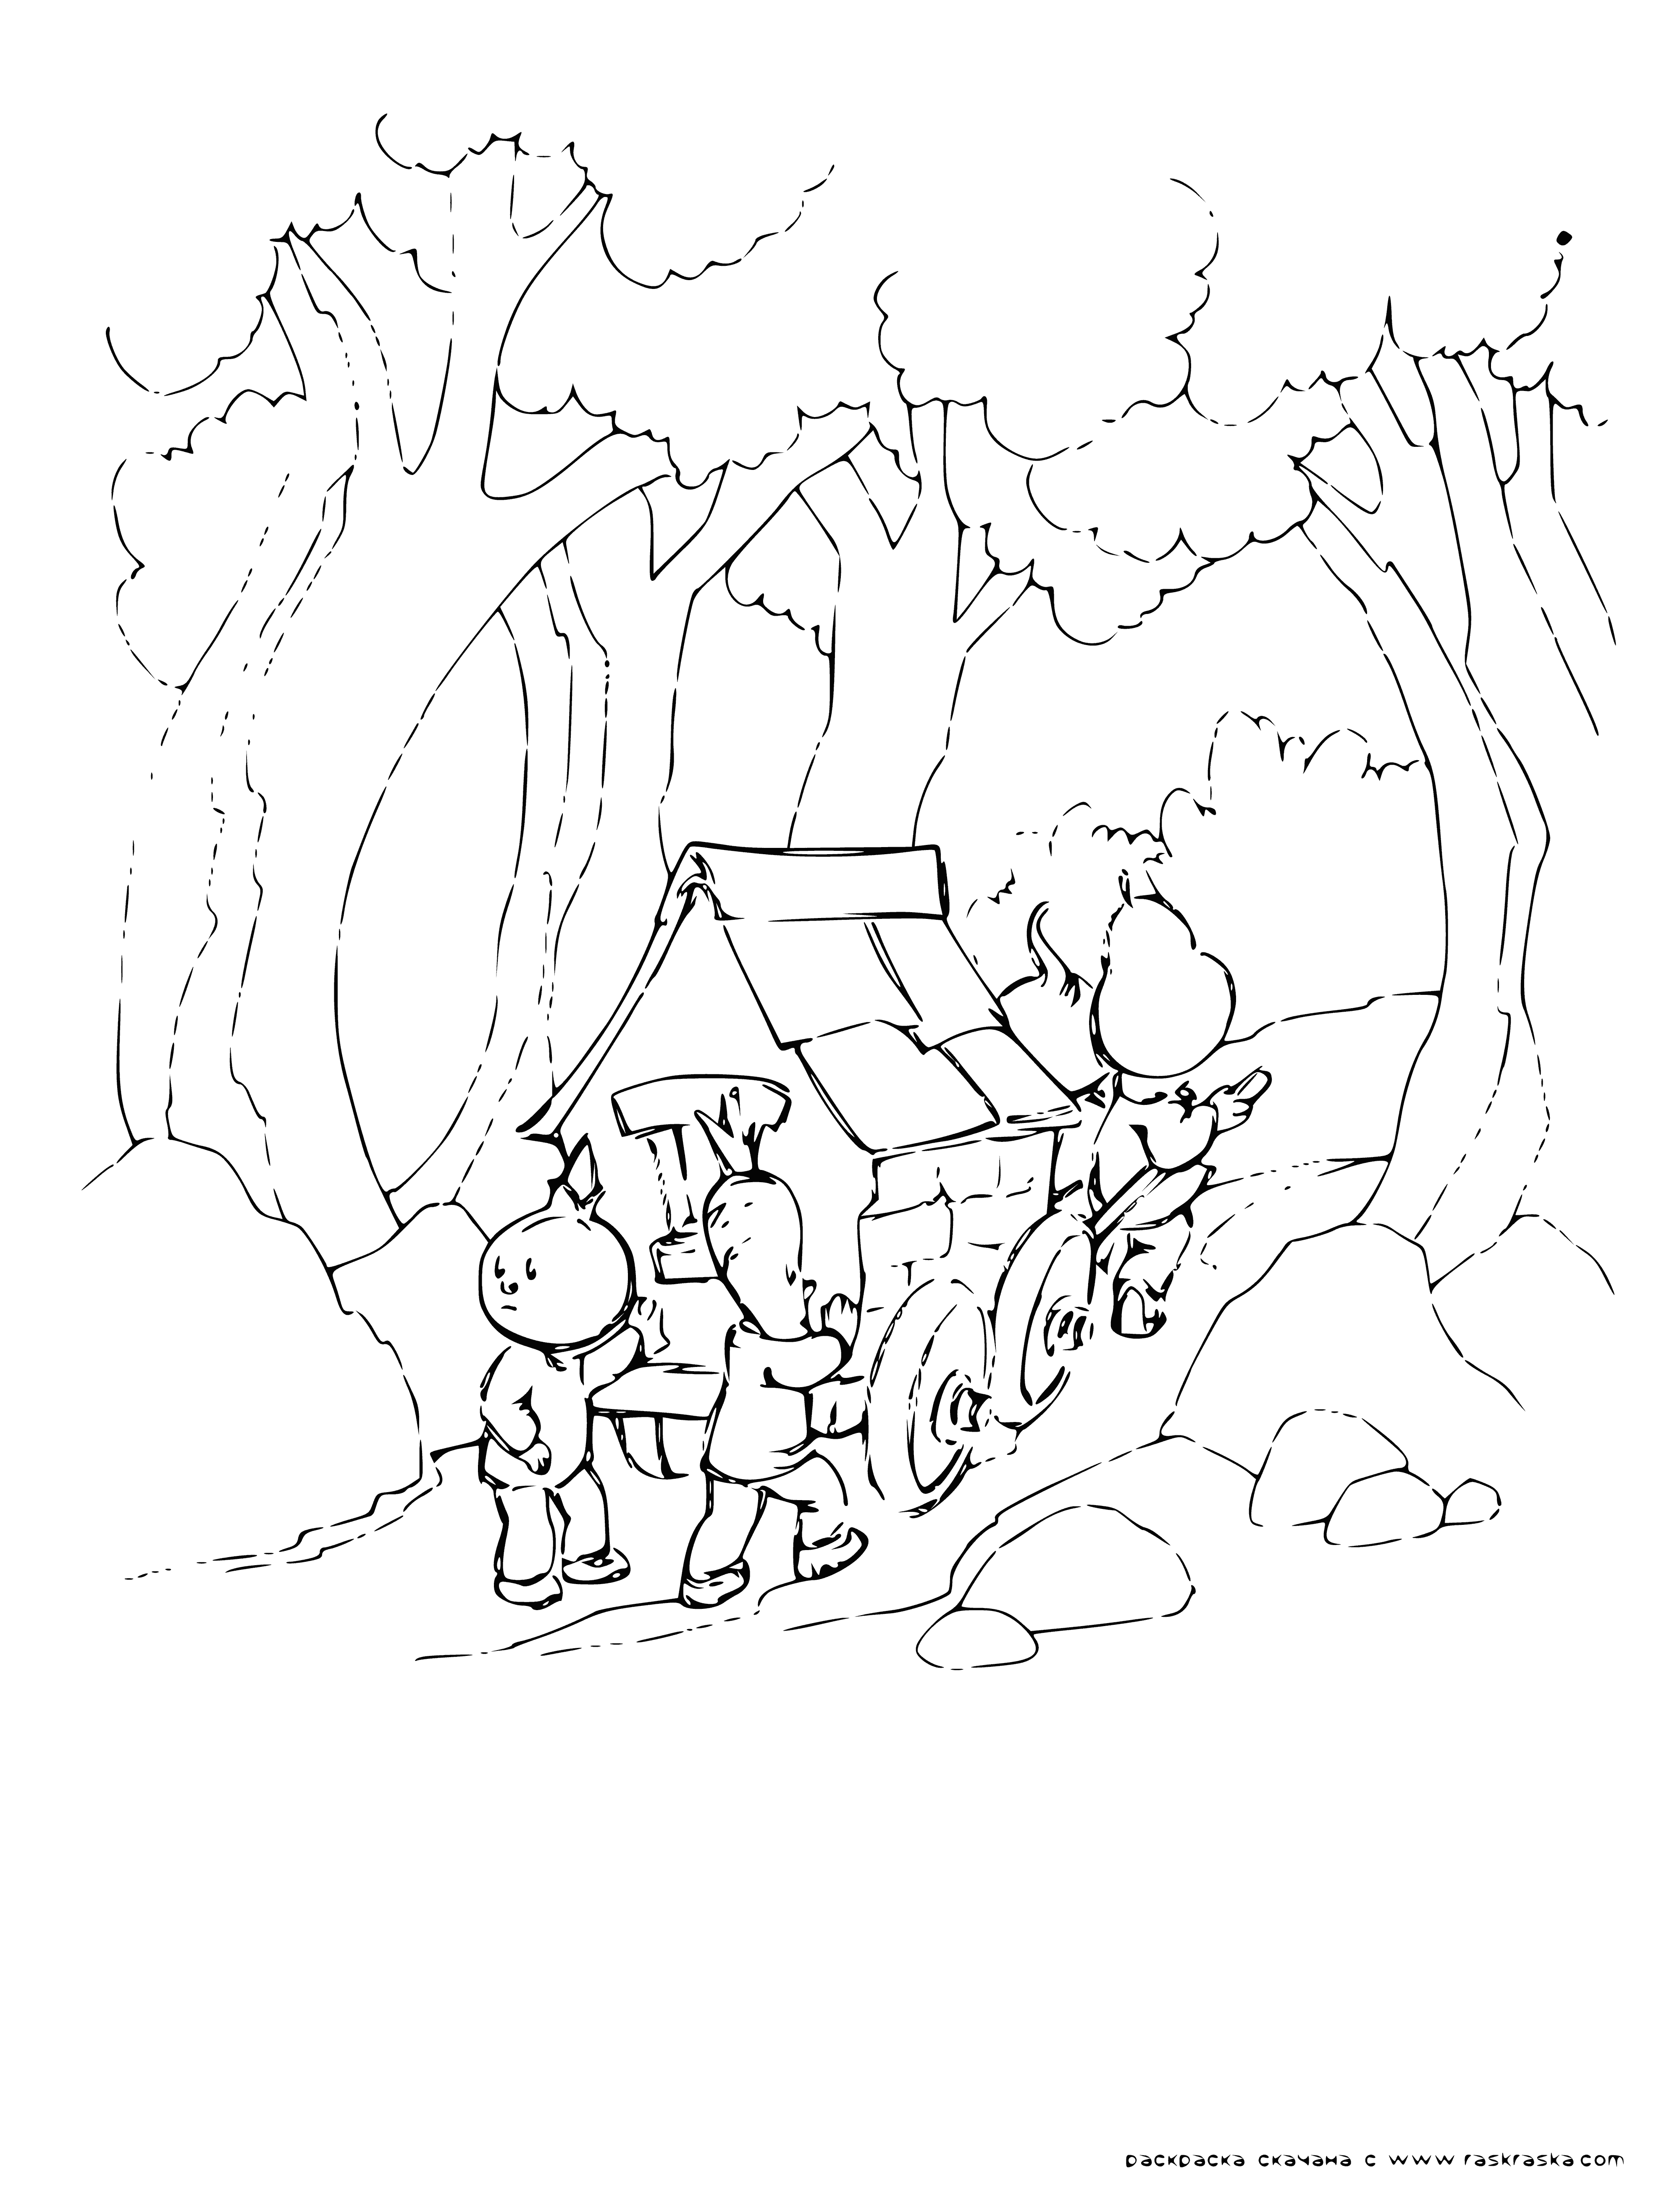 coloring page: Friends take away Cipollino's house in "The Adventures of Cipollino" to have a good time, but he fights back against injustice.